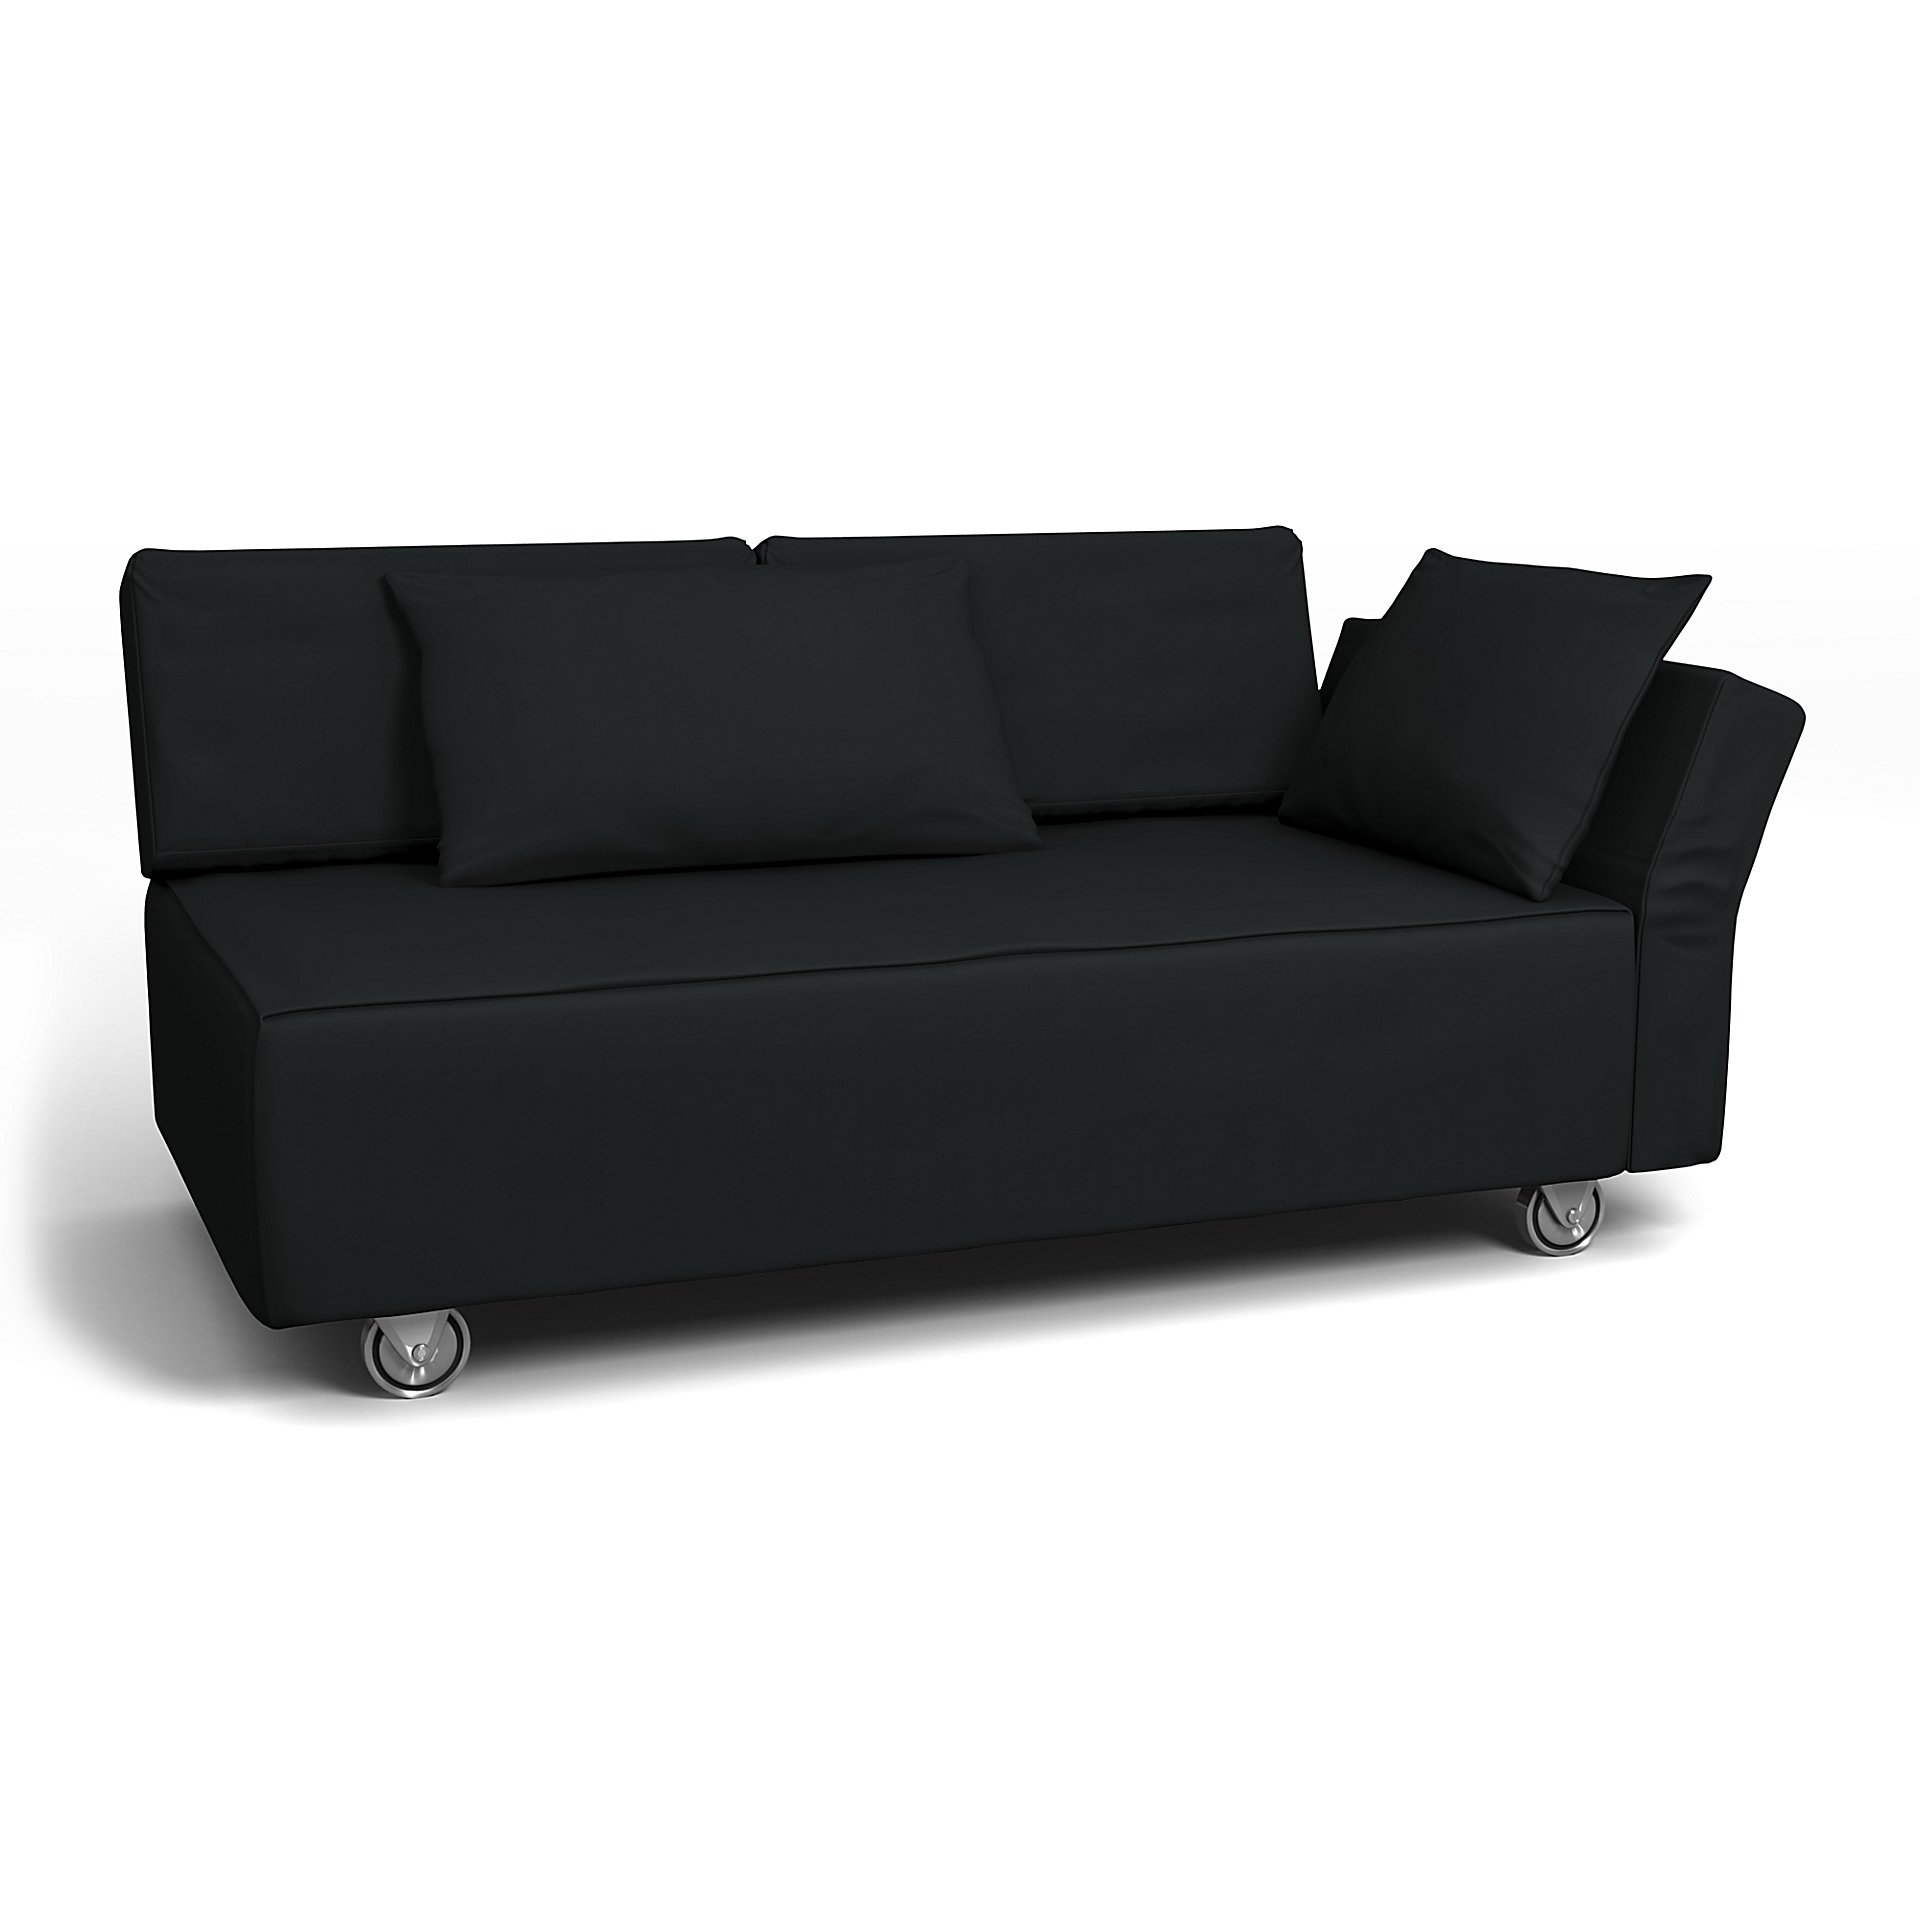 IKEA - Falsterbo 2 Seat Sofa with Right Arm Cover, Jet Black, Cotton - Bemz